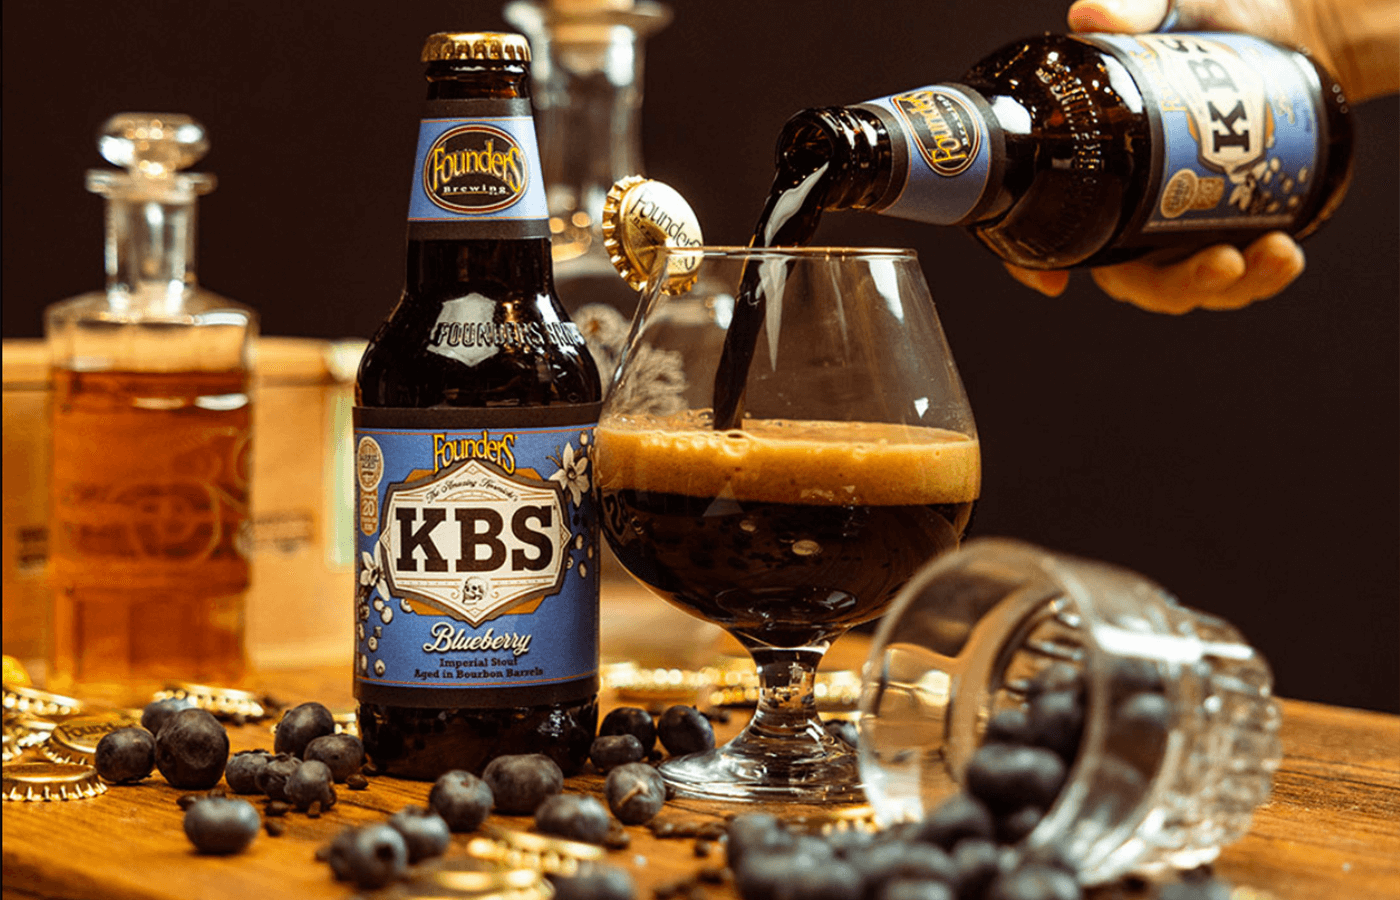 KBS Blueberry being poured into snifter